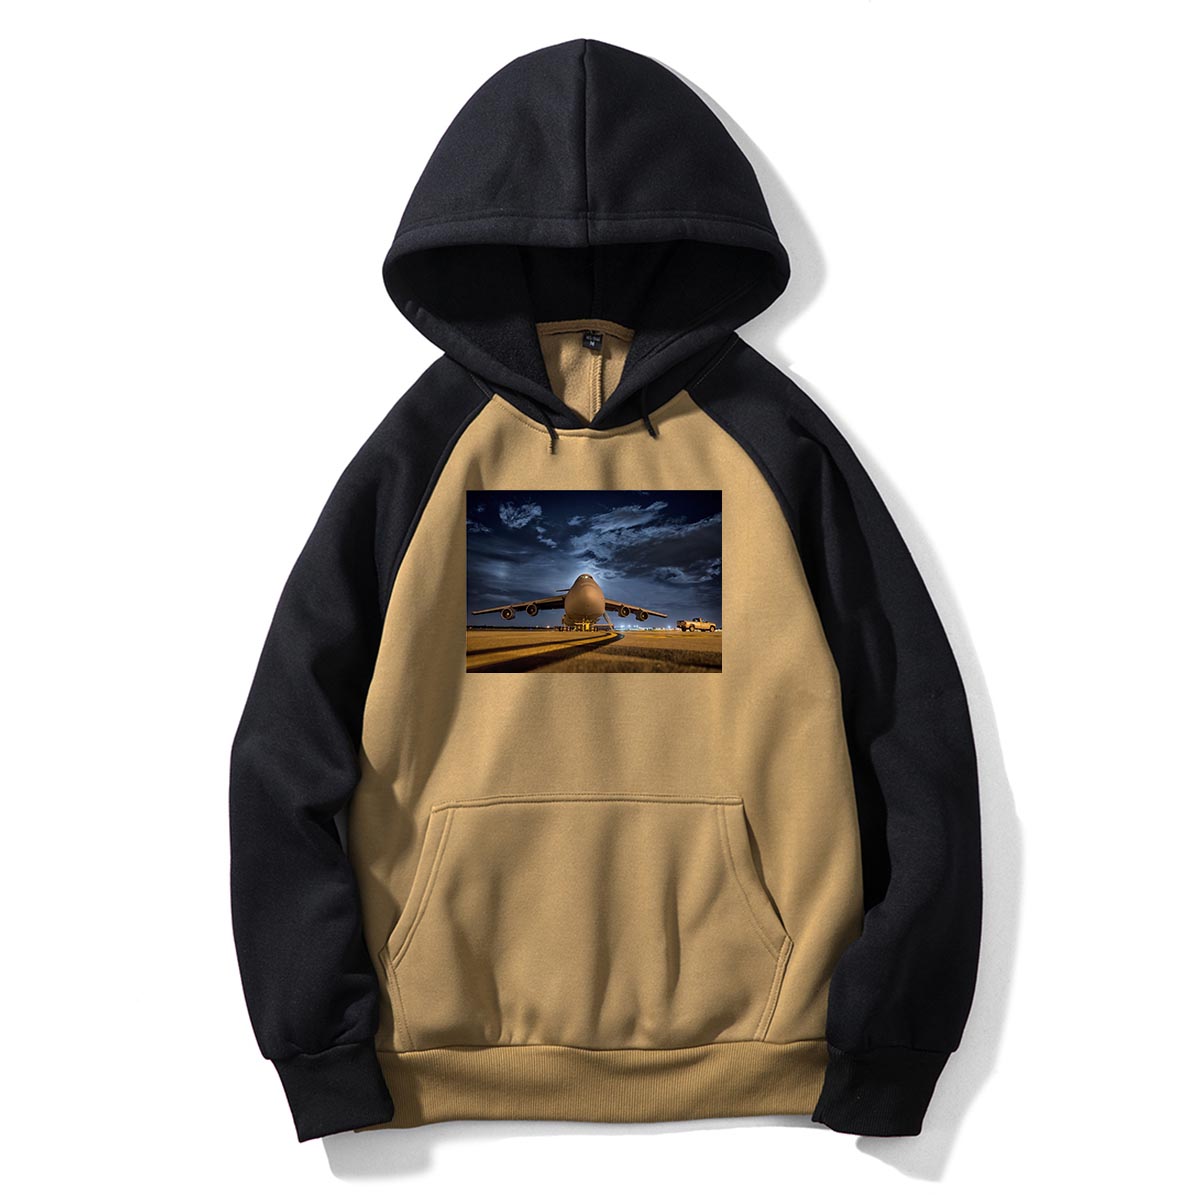 Amazing Military Aircraft at Night Designed Colourful Hoodies